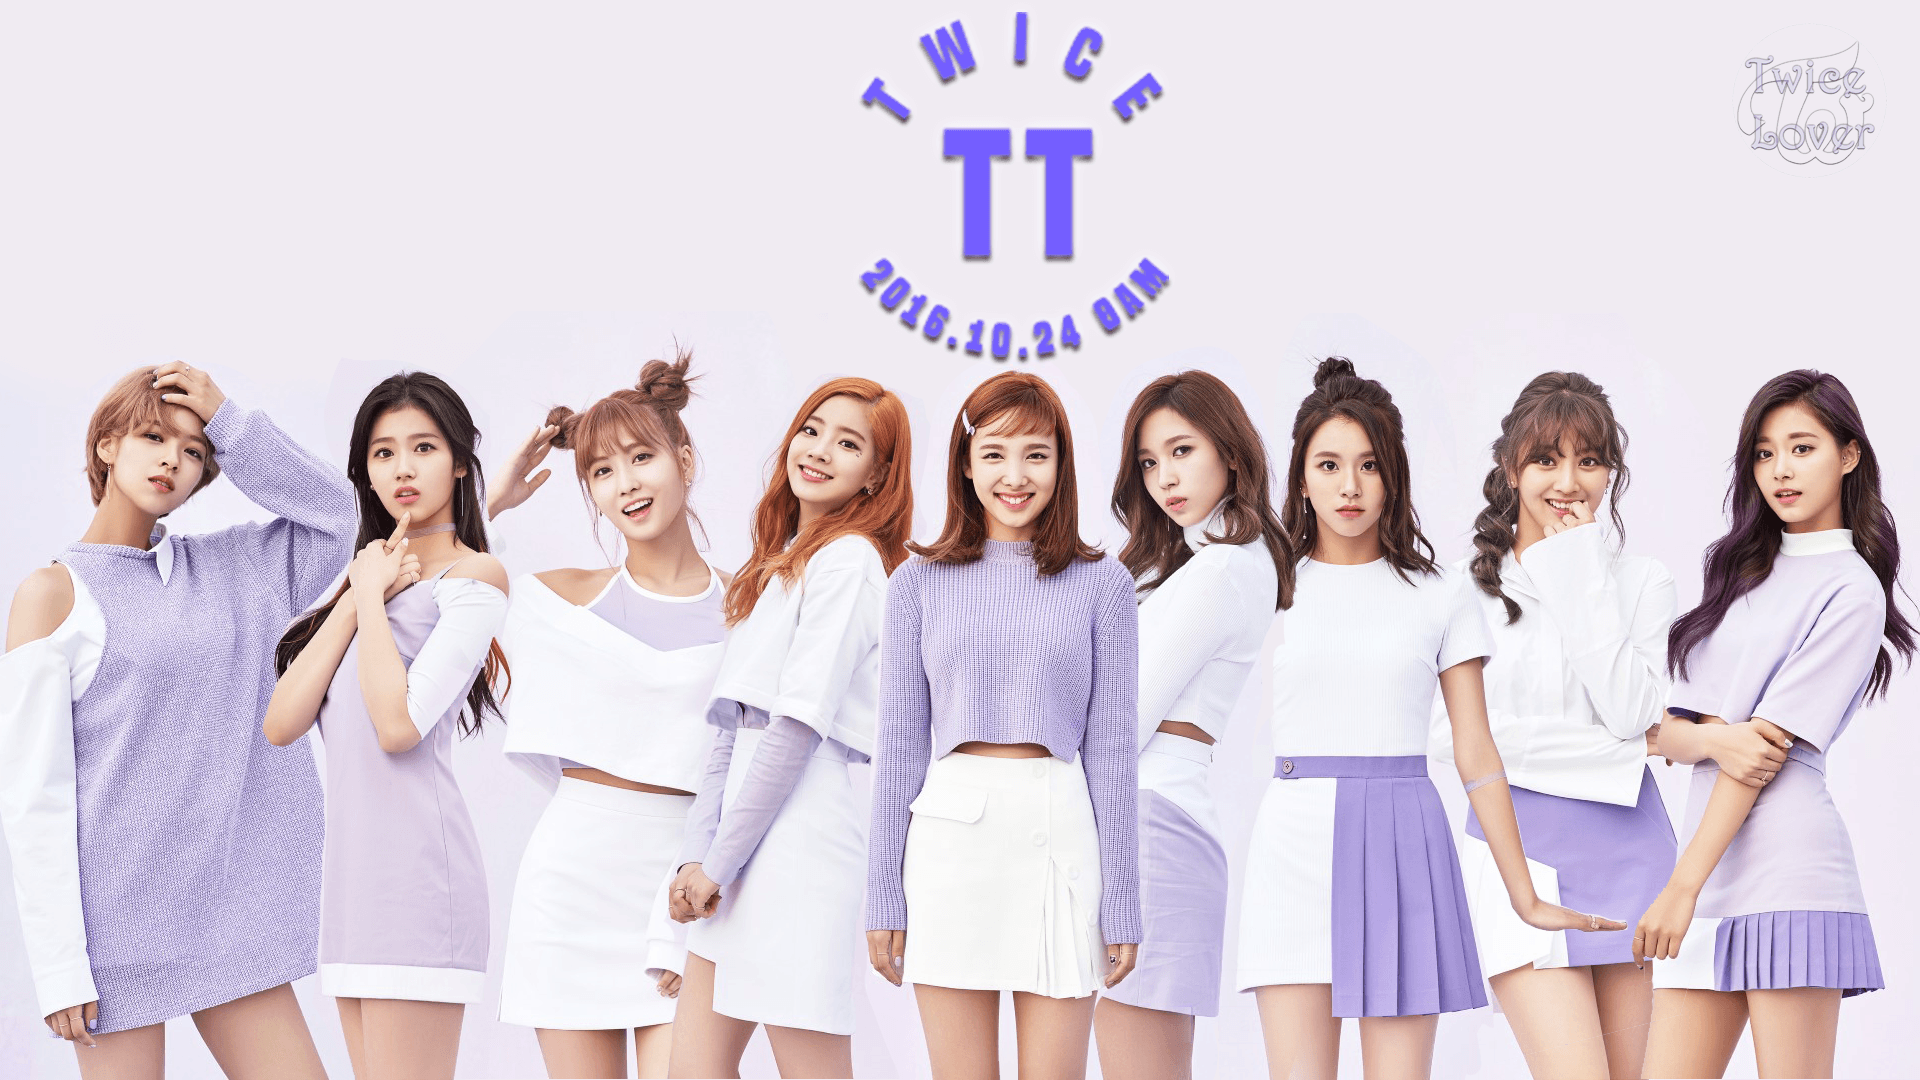 Twice Tt Wallpapers Related Keywords & Suggestions.